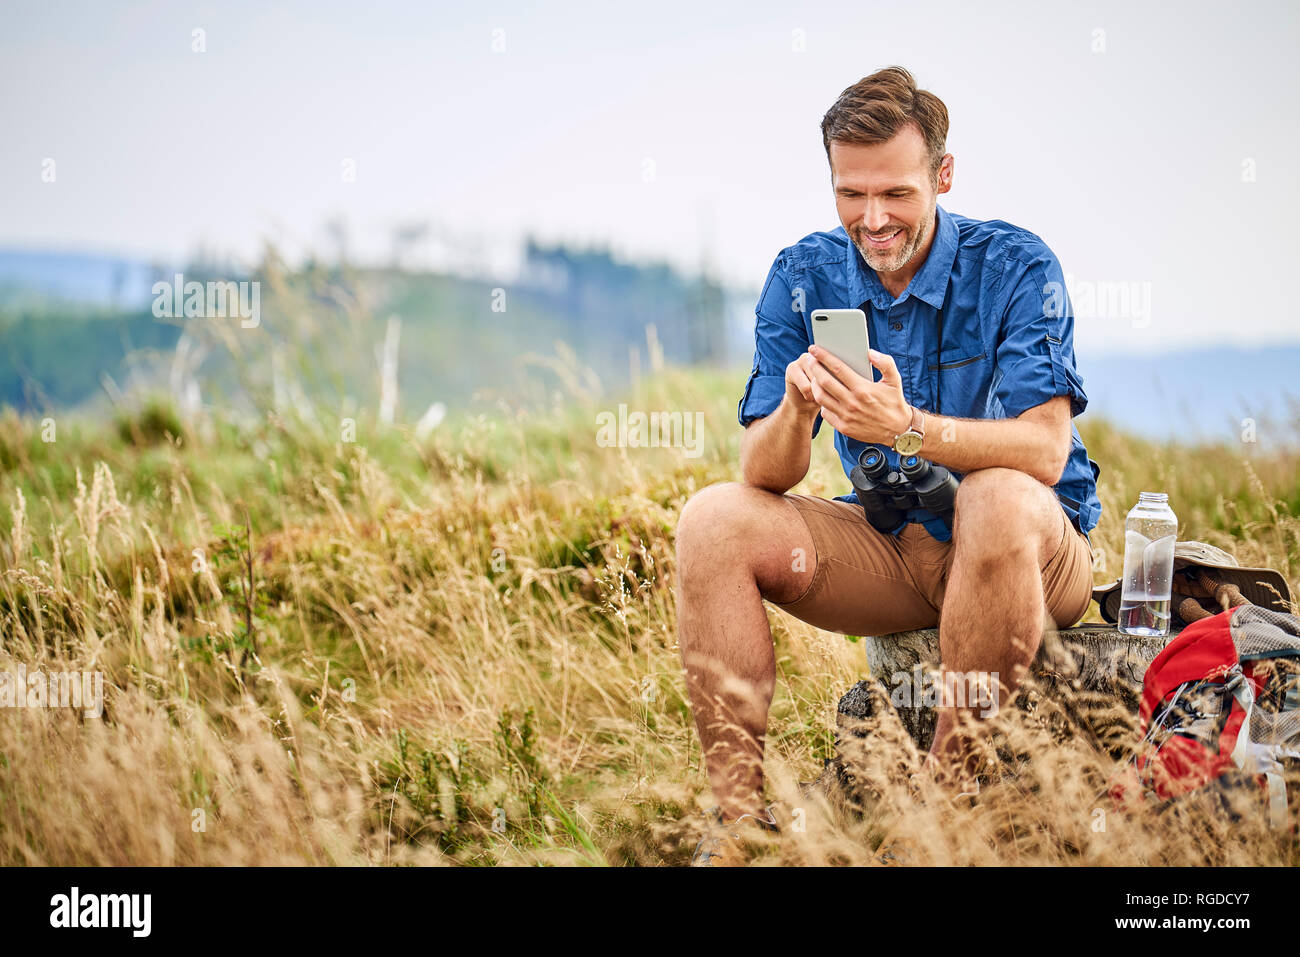 Smiling man resting and checking his cell phone during hiking trip Stock Photo